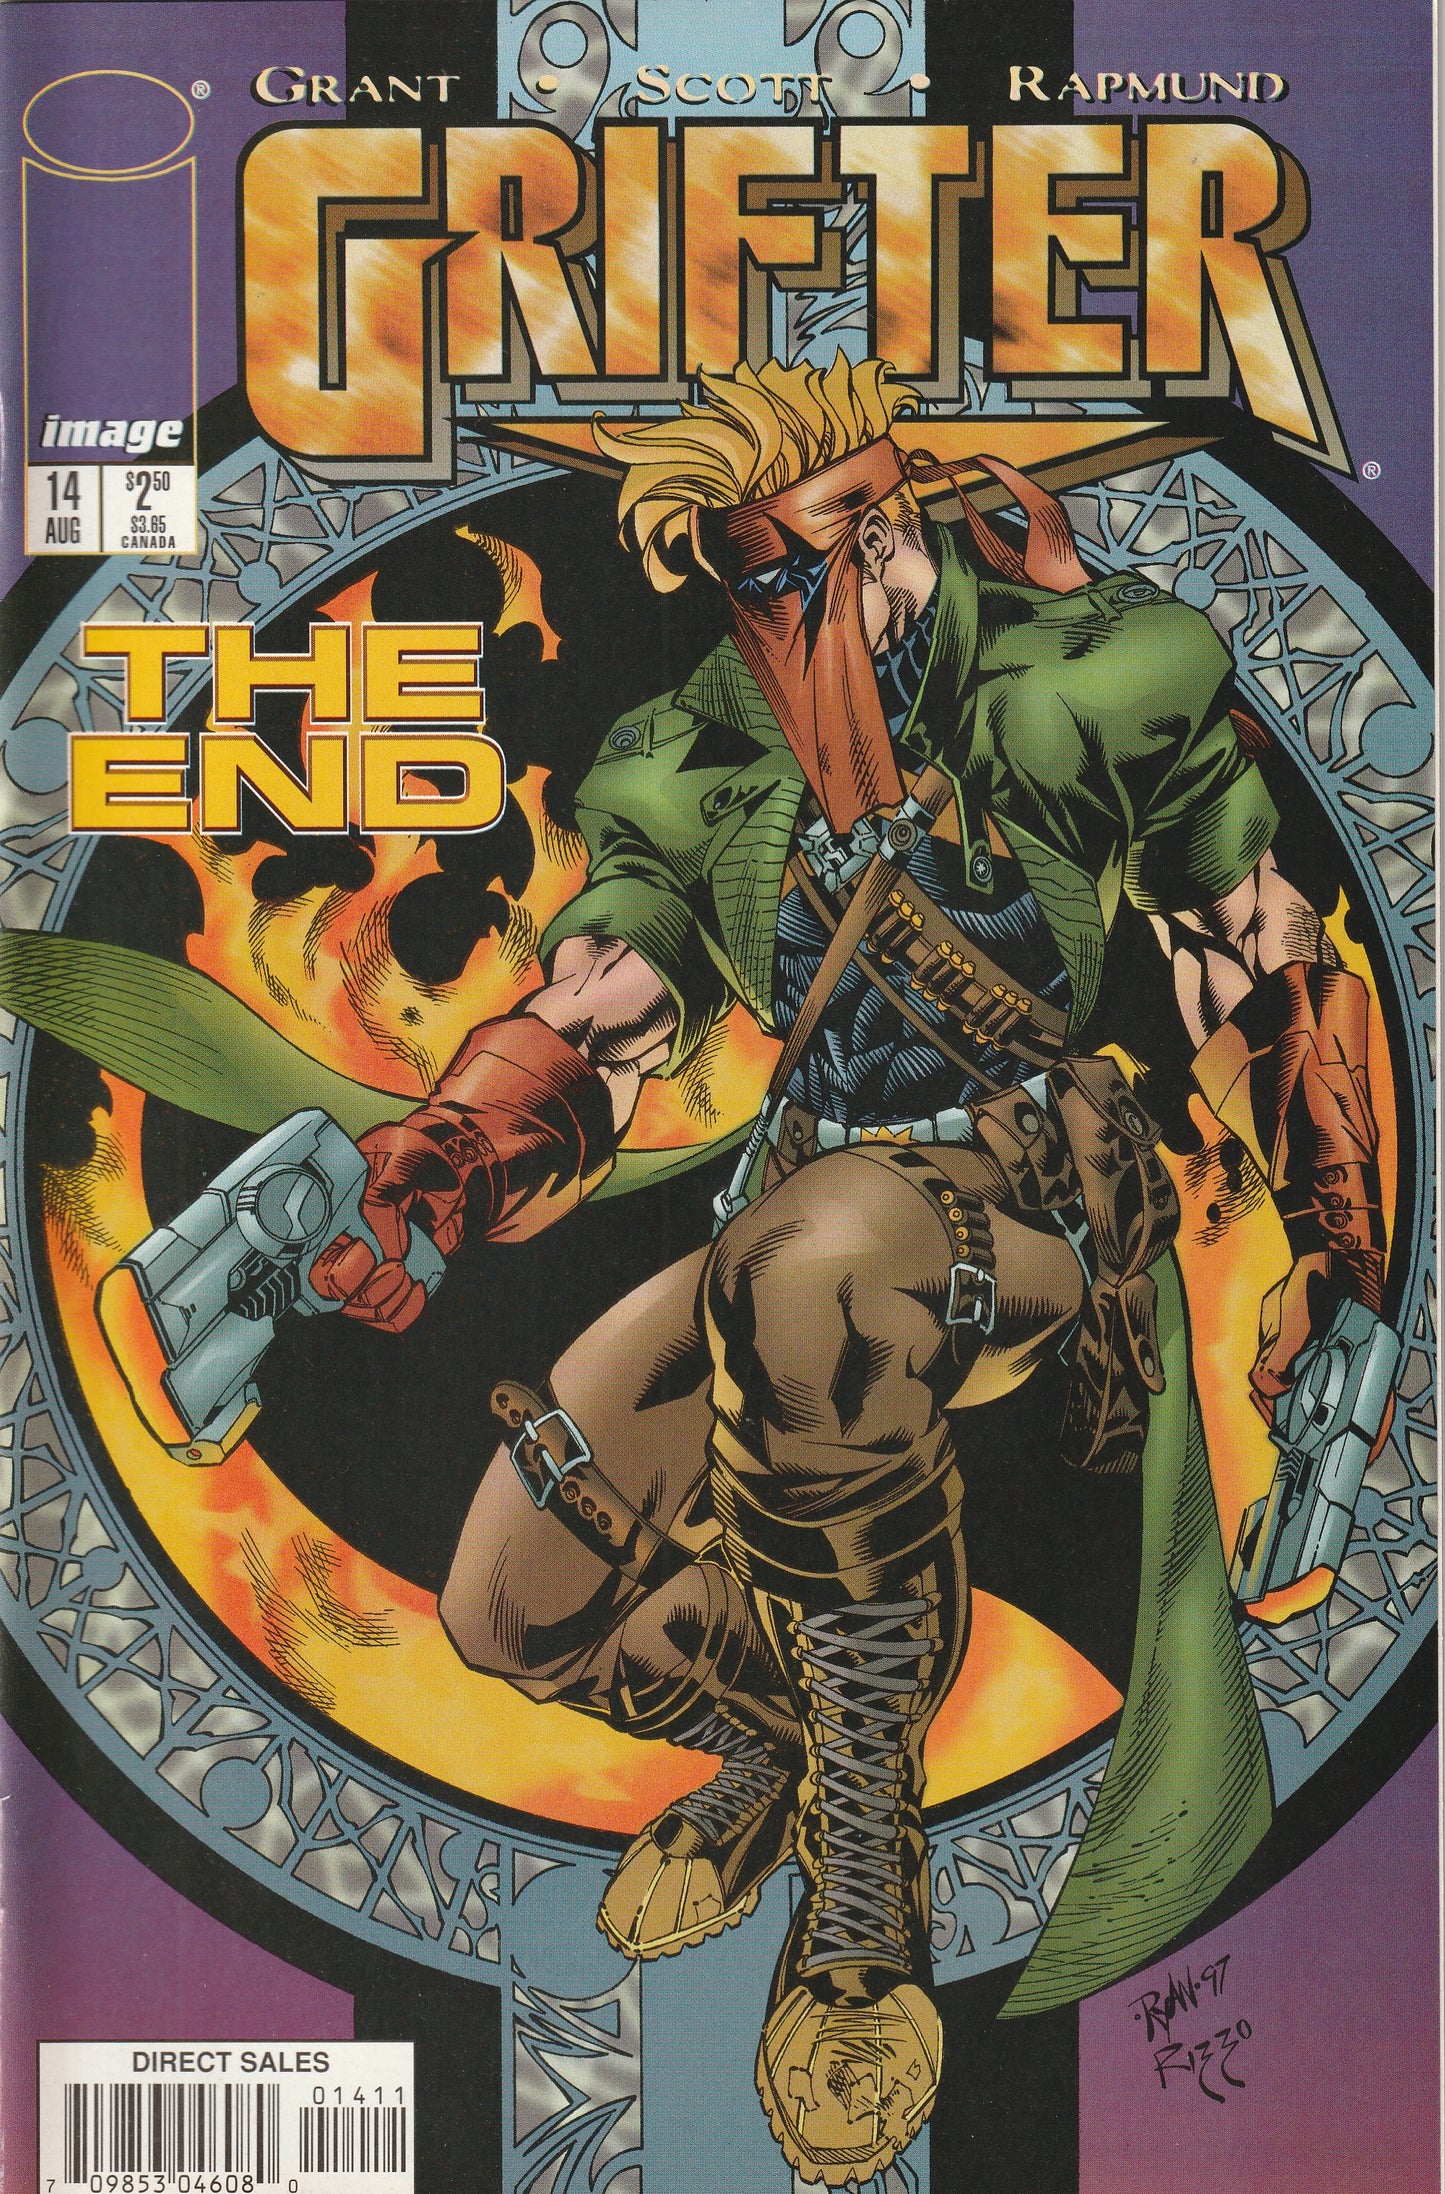 Grifter #14 (1997) - Final issue of series